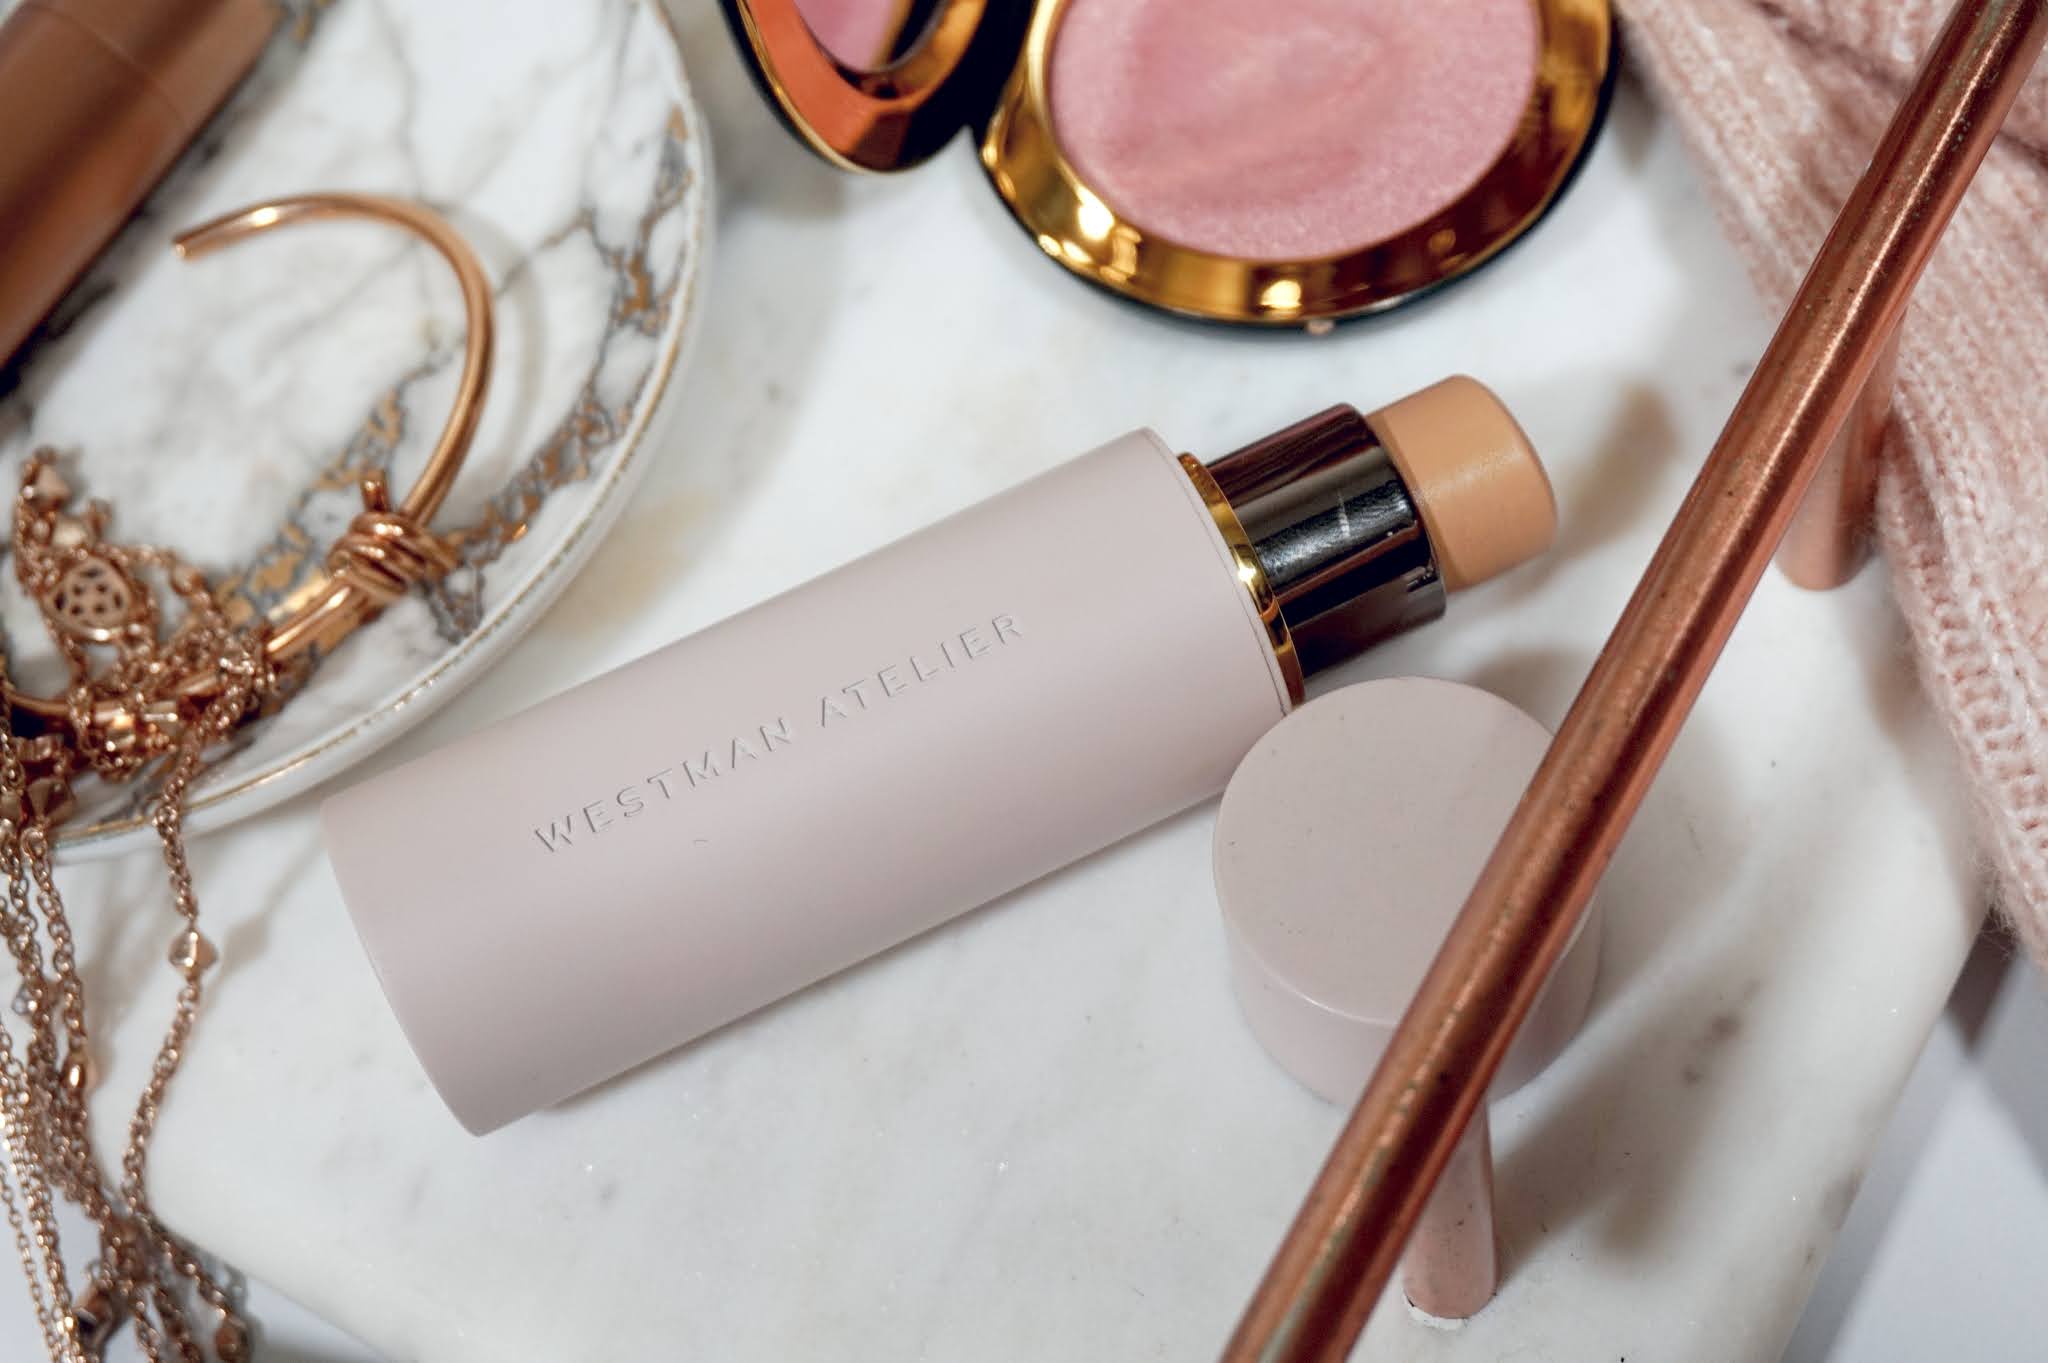 Westman Atelier Vital Skin Foundation Stick Review and Swatches